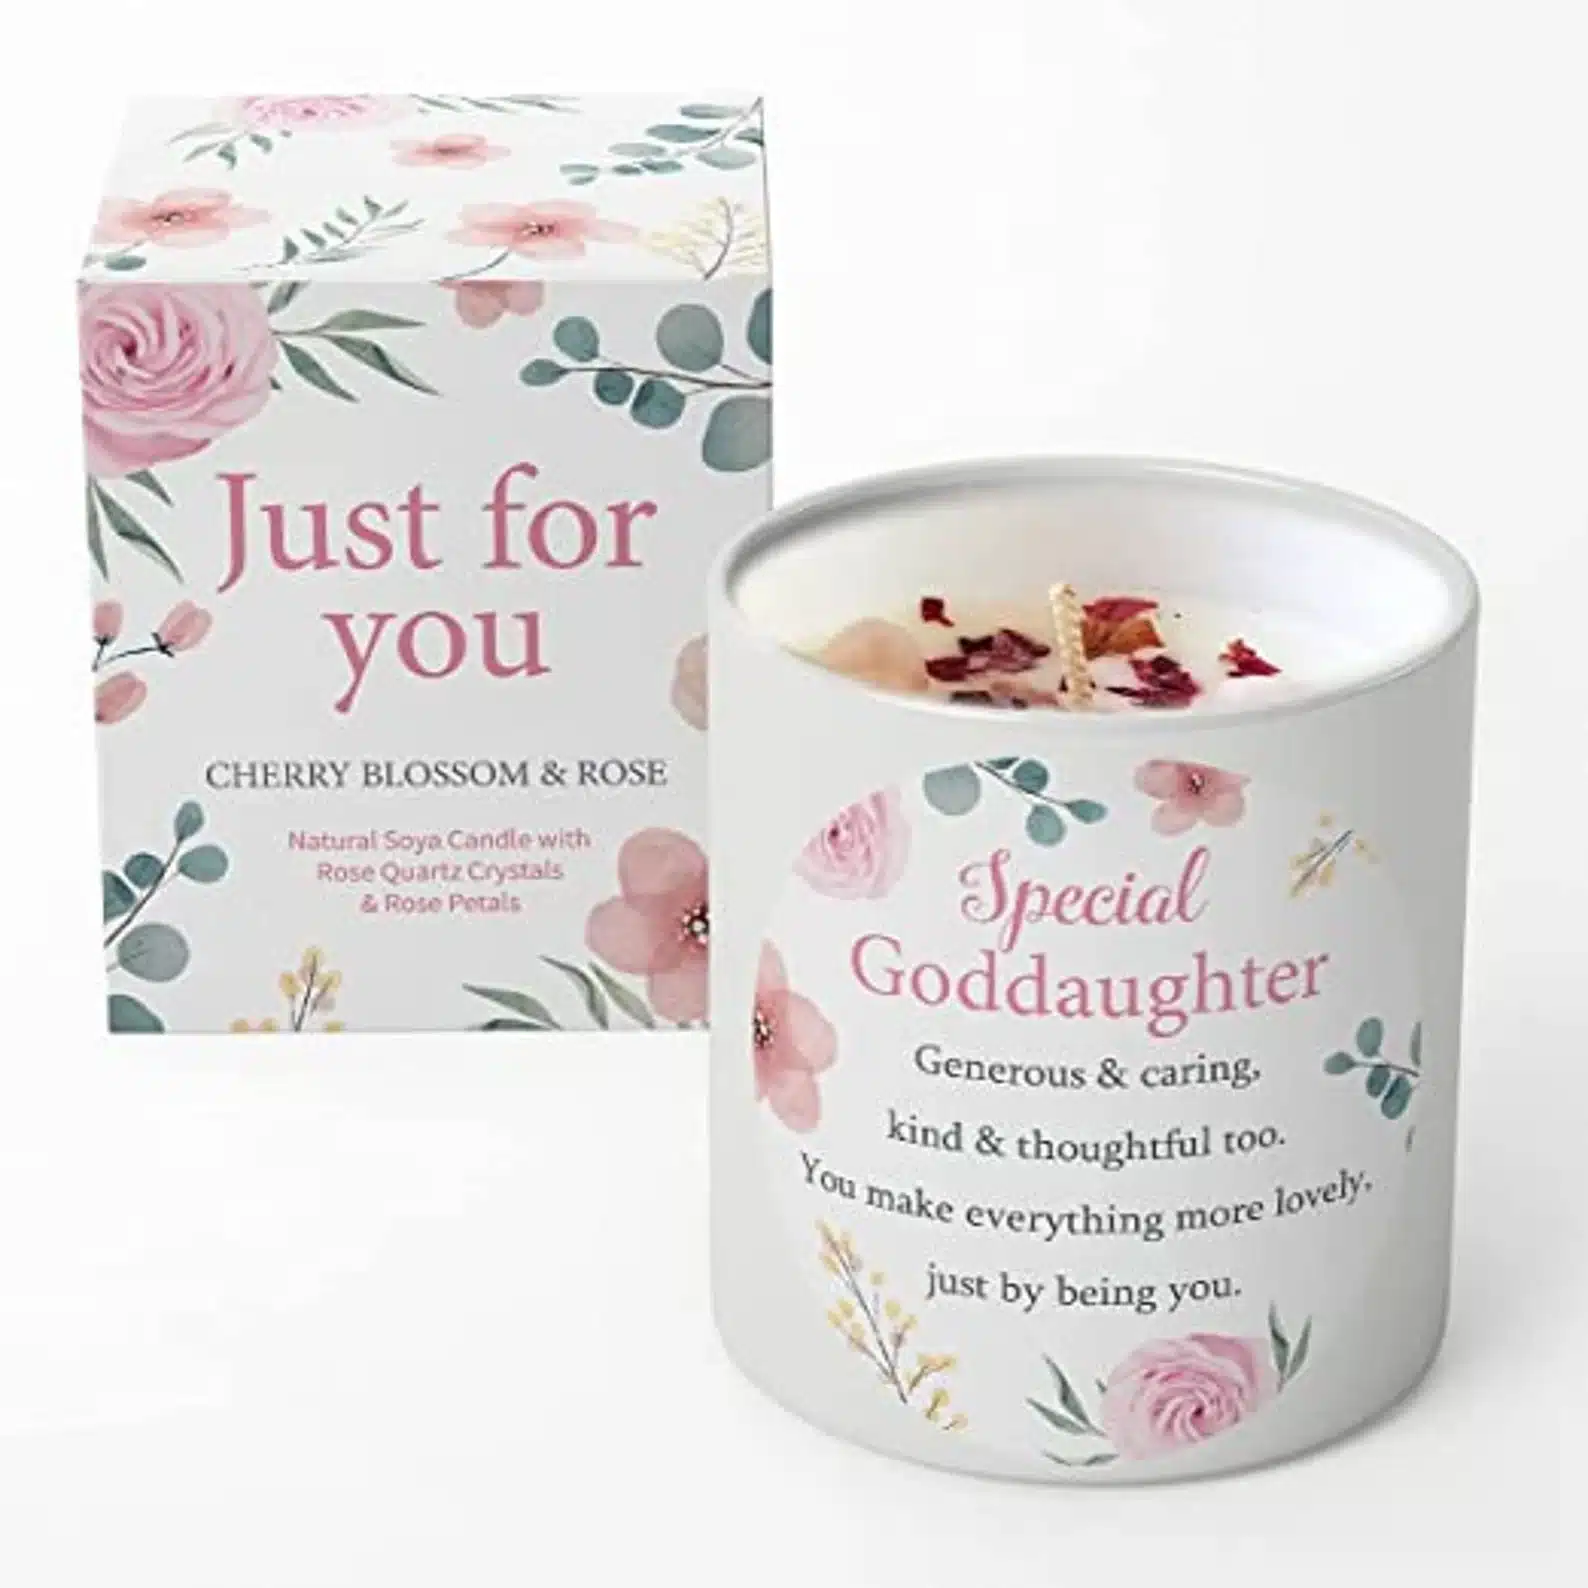 Goddaughter Scented Candle